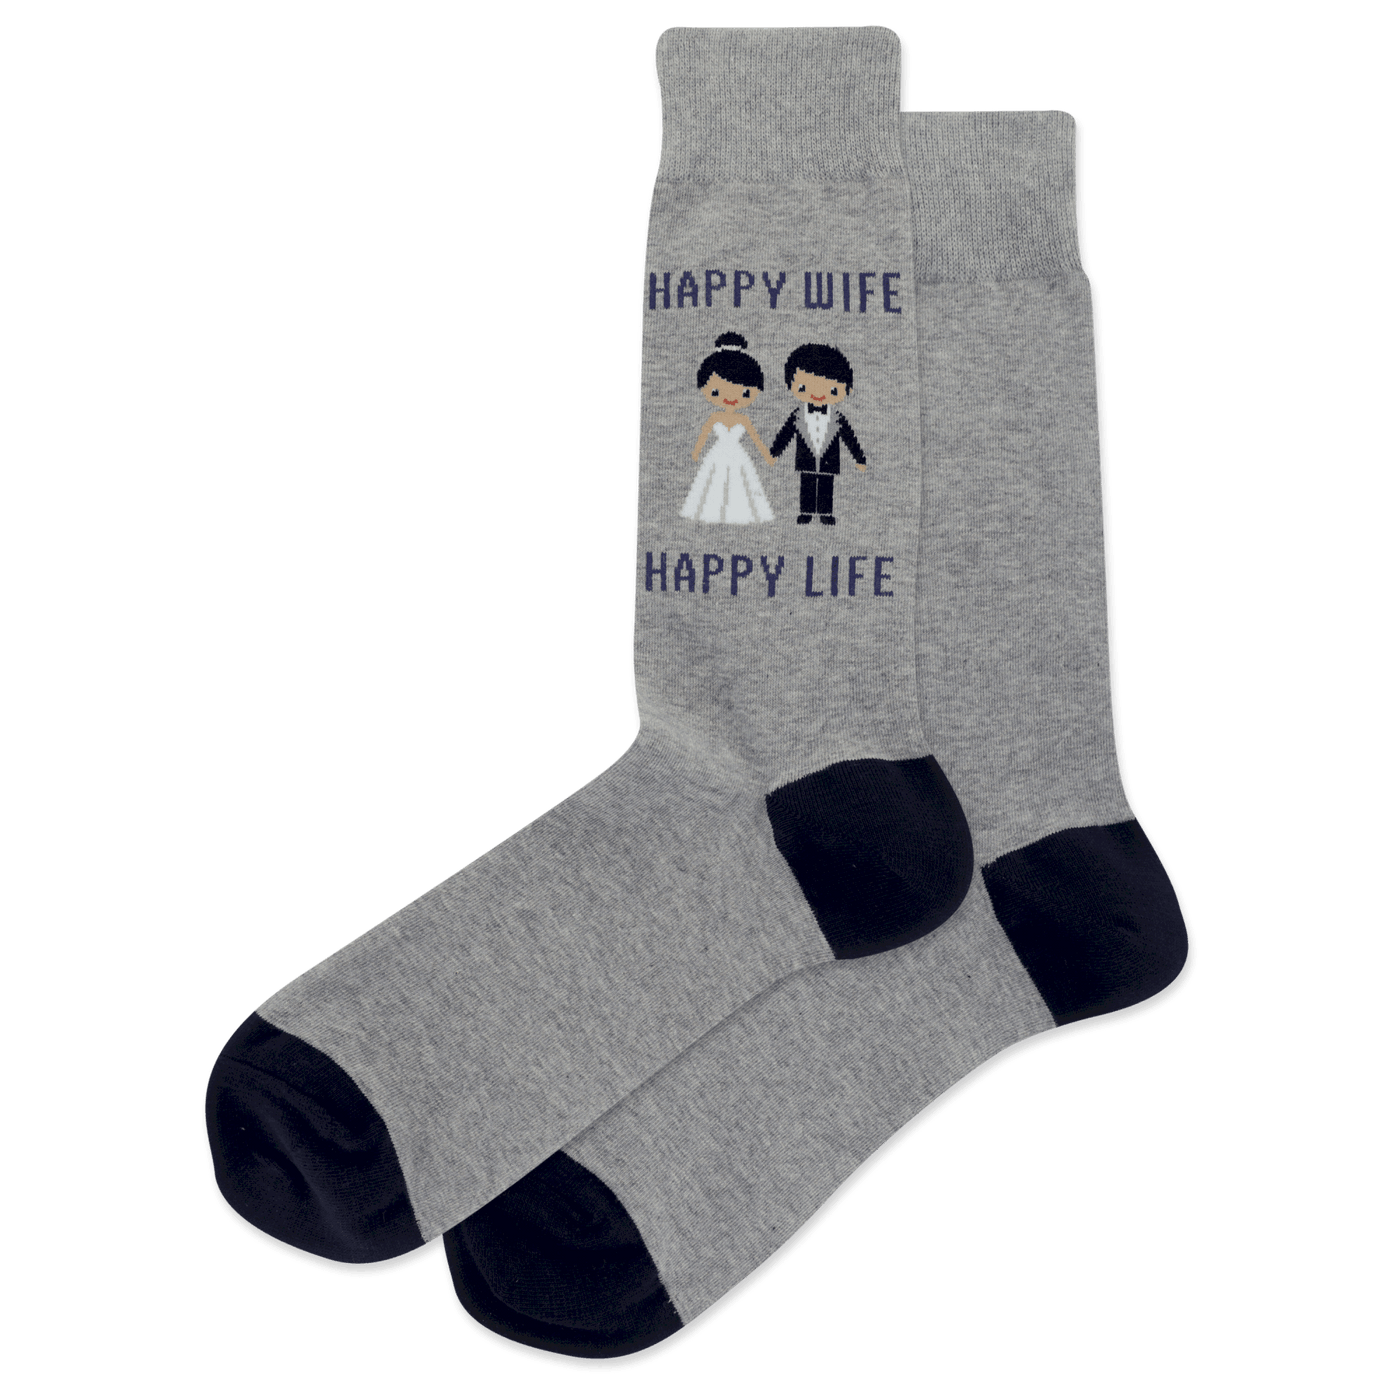 "Happy Wife Happy Life" Cotton Crew Socks by Hot Sox - Large